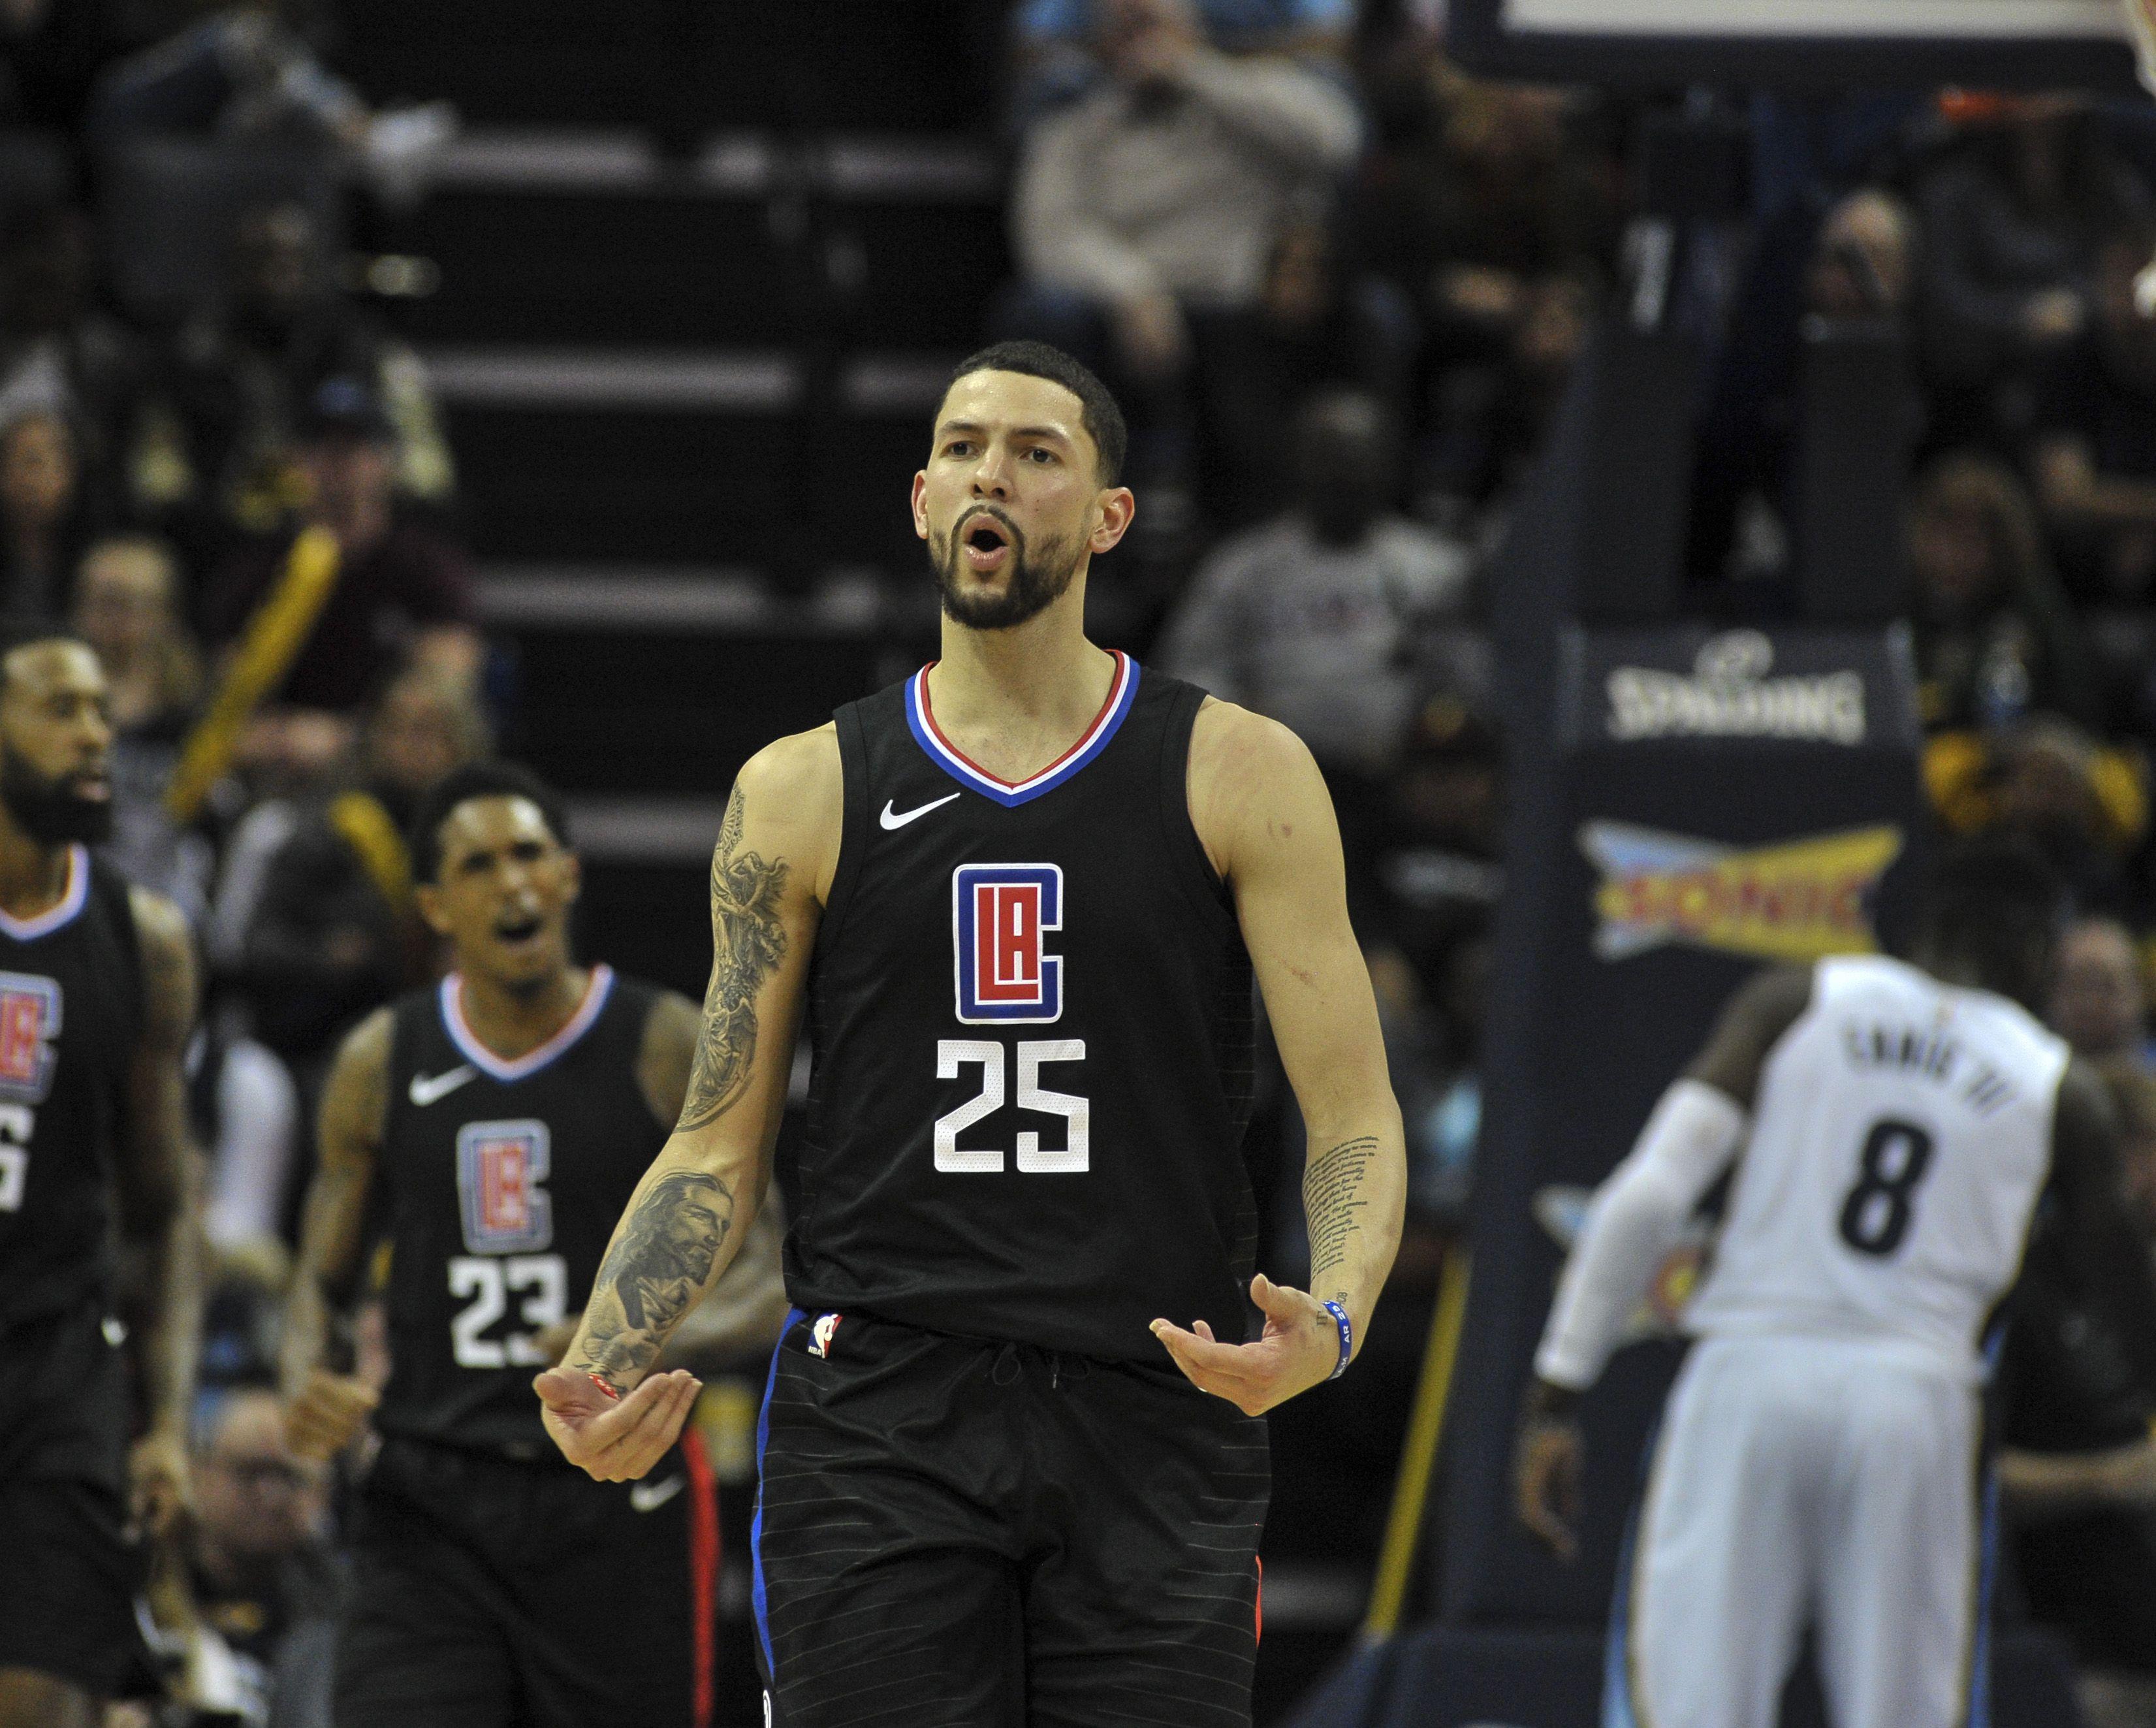 Clips Nation, a Los Angeles Clippers community